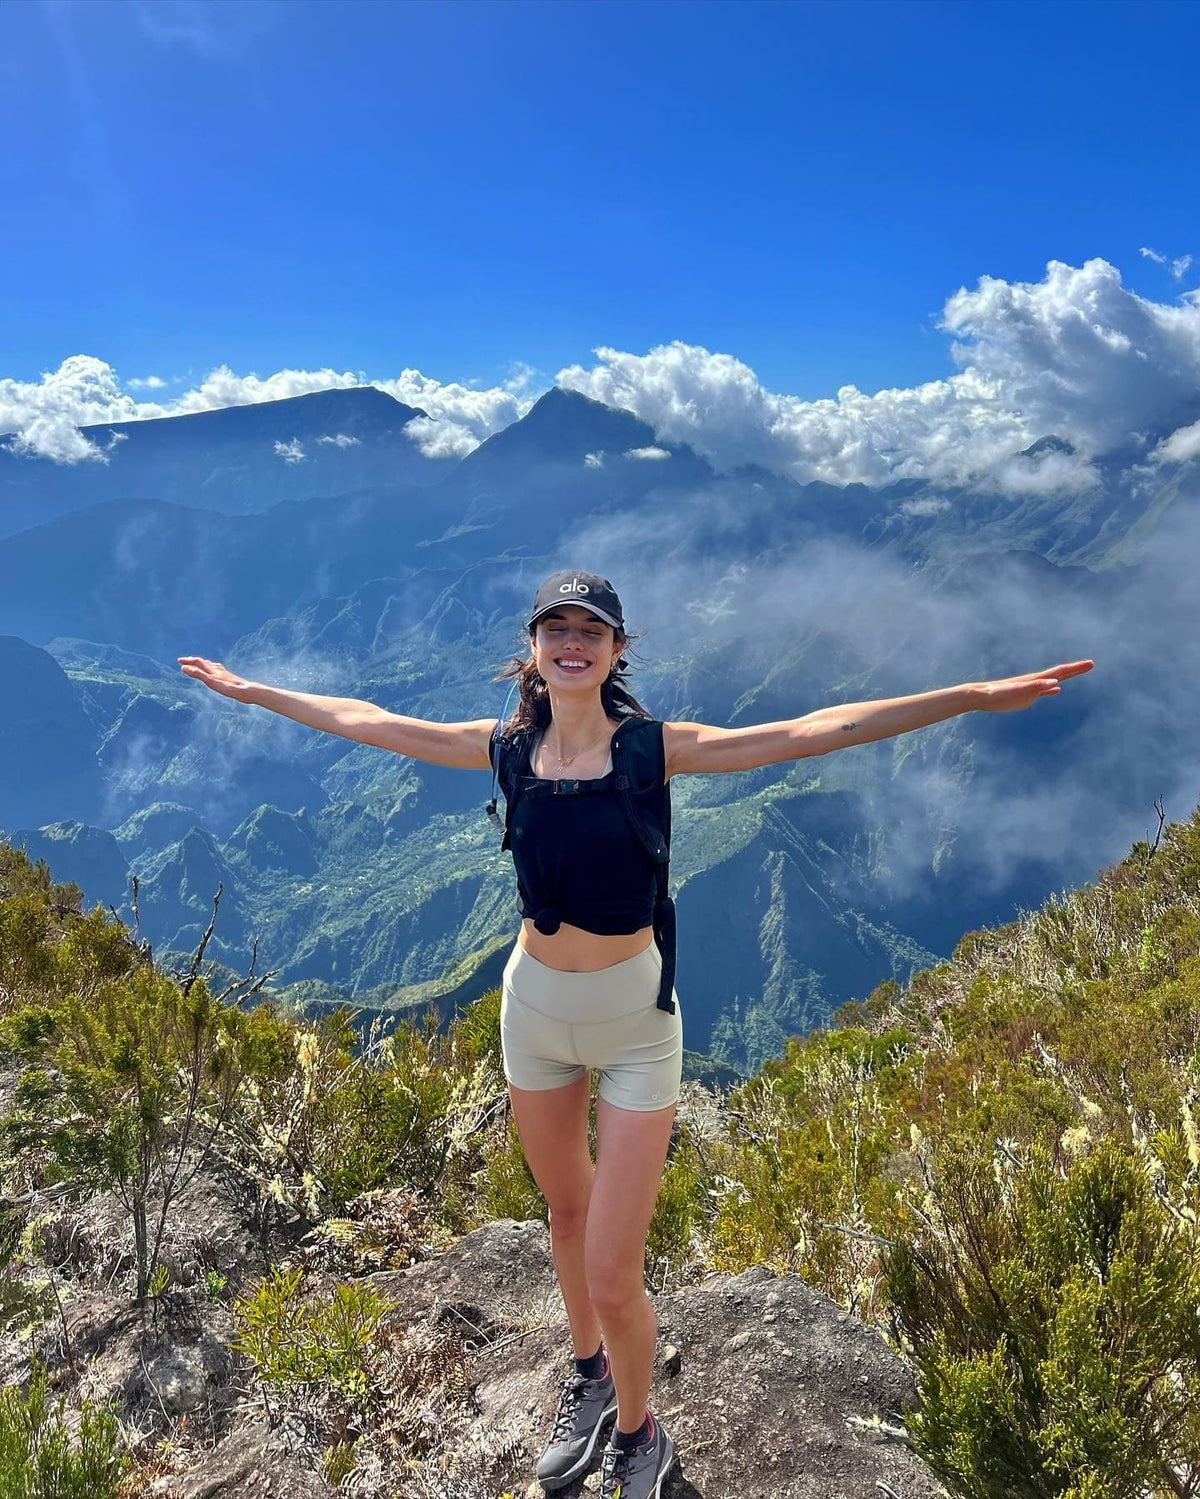 @blancapadilla wearing a pair of workout shorts and a black workout tank-top while posing high on a mountain during a hike with a large mountain range in the background and clouds peaking through the peaks in the distance. 